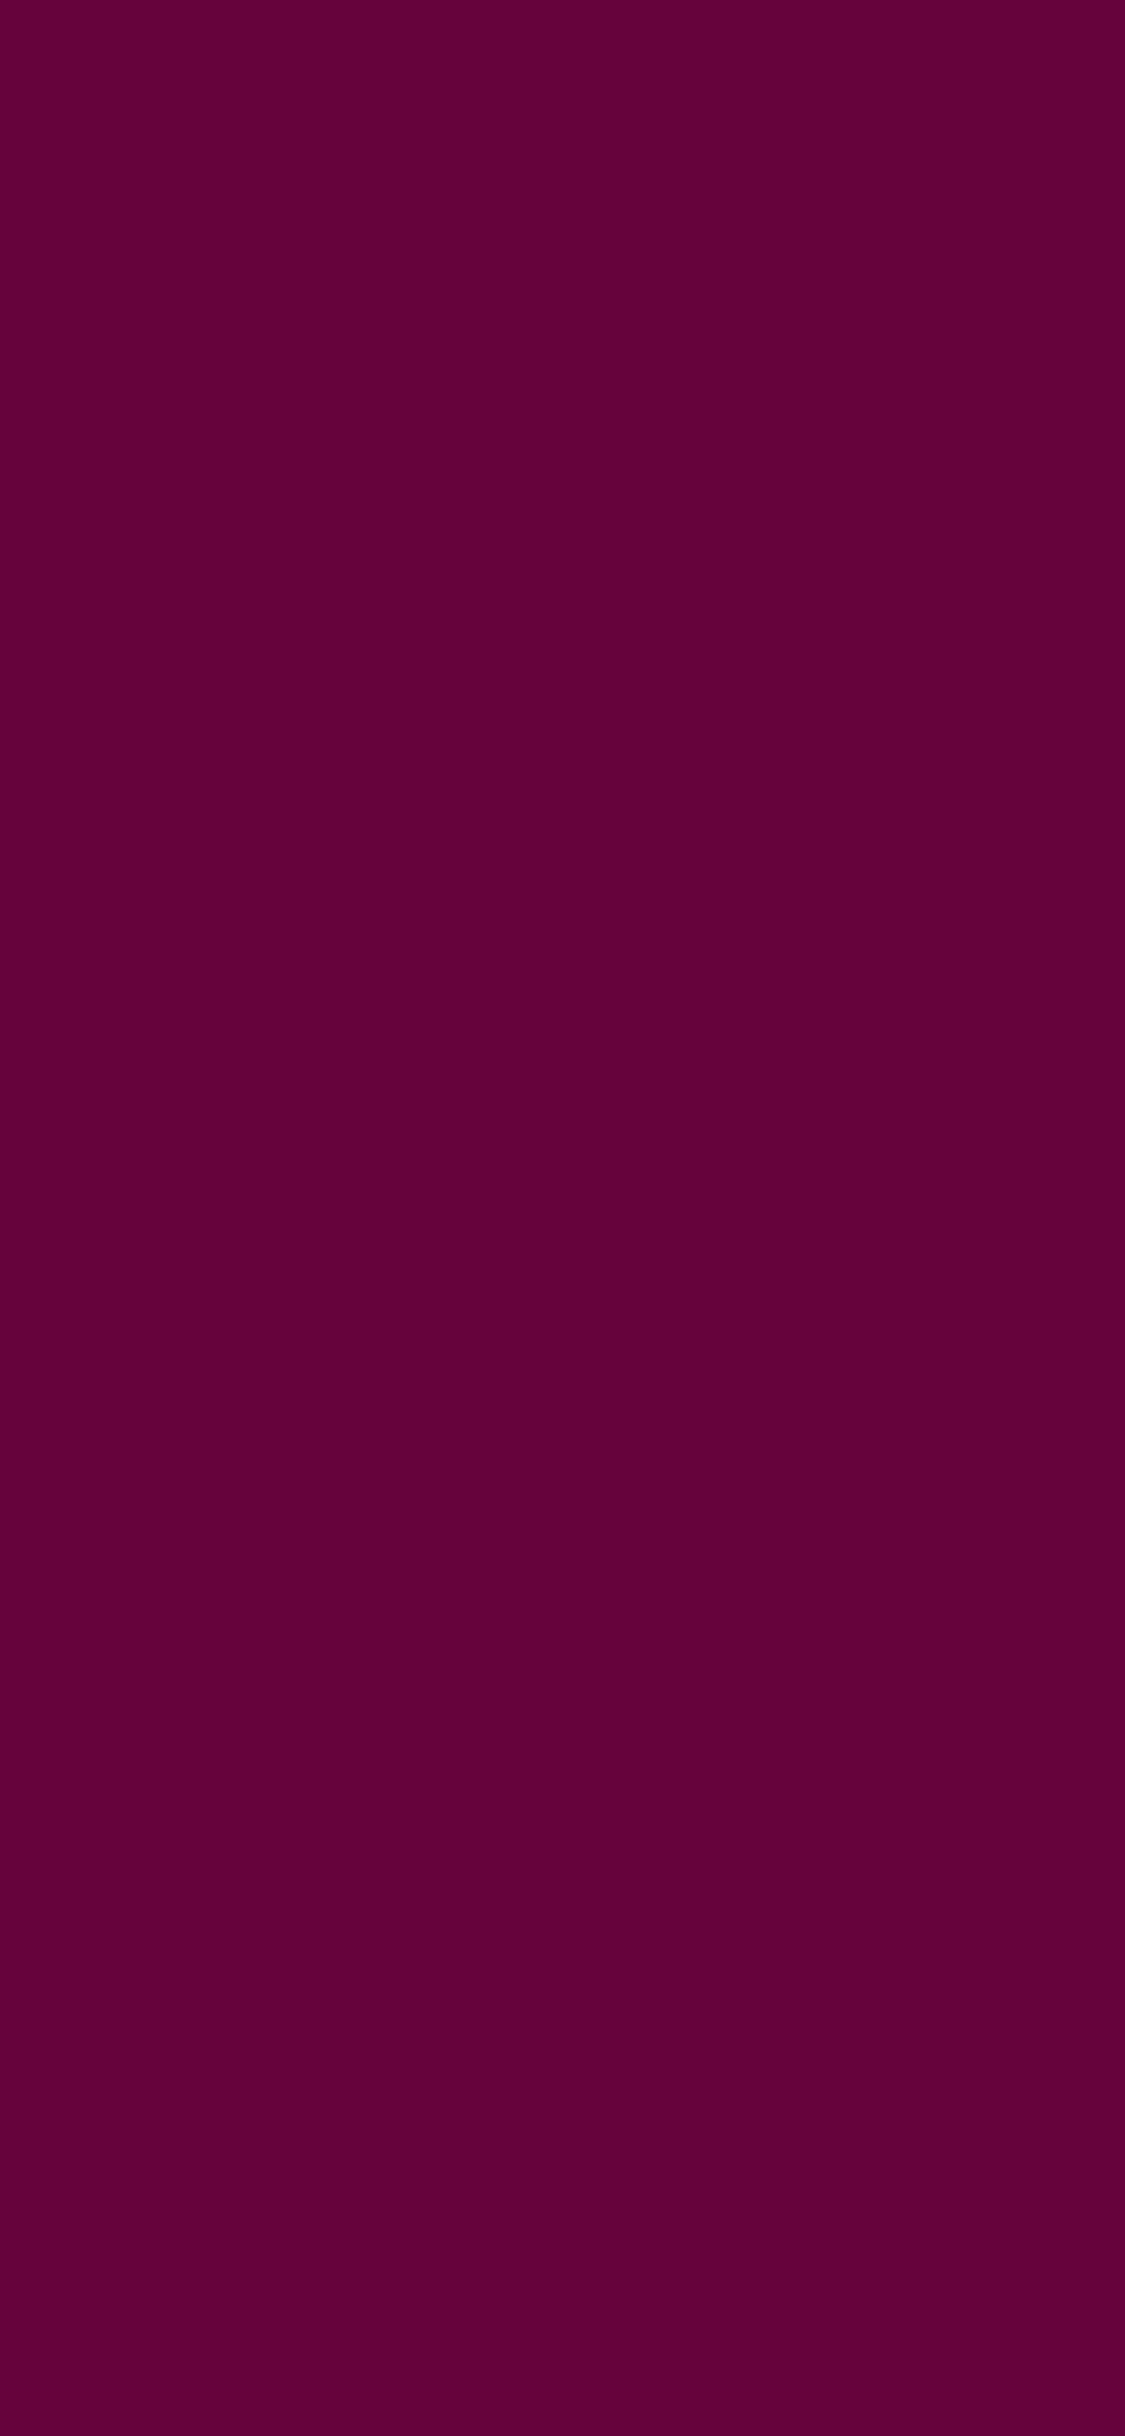 1125x2436 Imperial Purple Solid Color Background